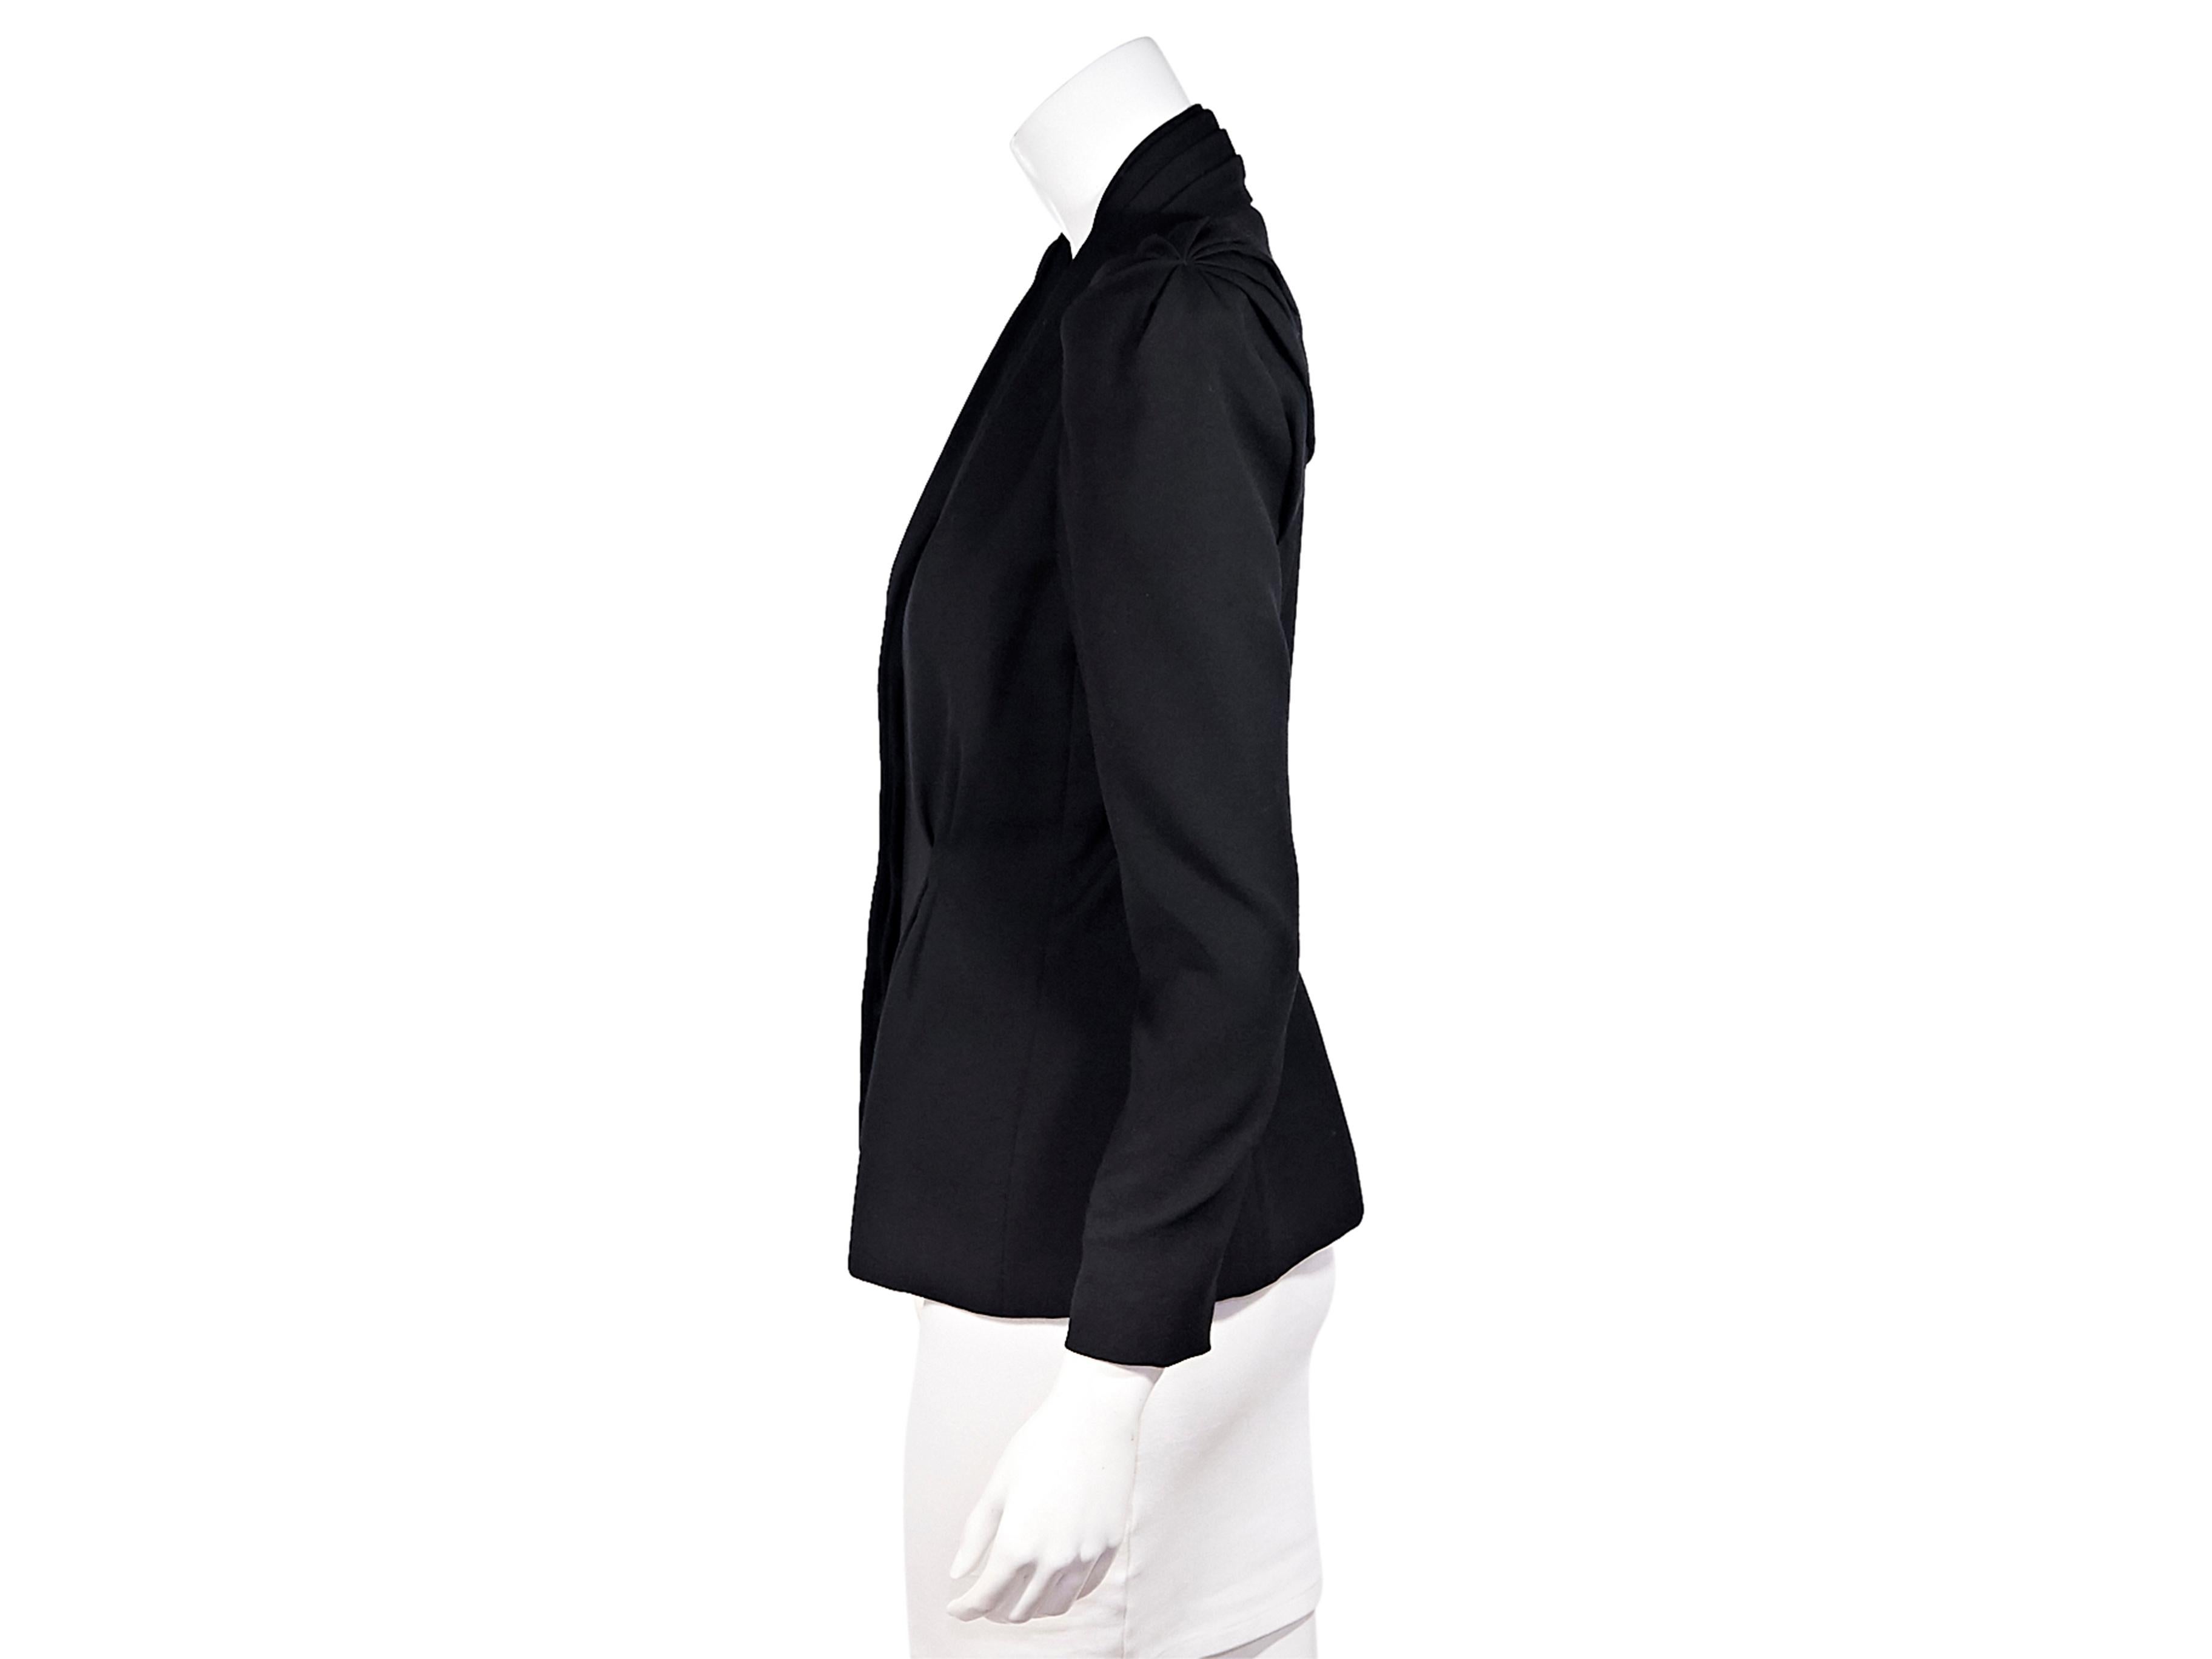 Product details: Made in Italy, this Alexander McQueen blazer is tailored from lamb's wool with structured shoulders and pin-tuck details at the front and concealed button fastenings through the front. Draw attention to the shawl collar with